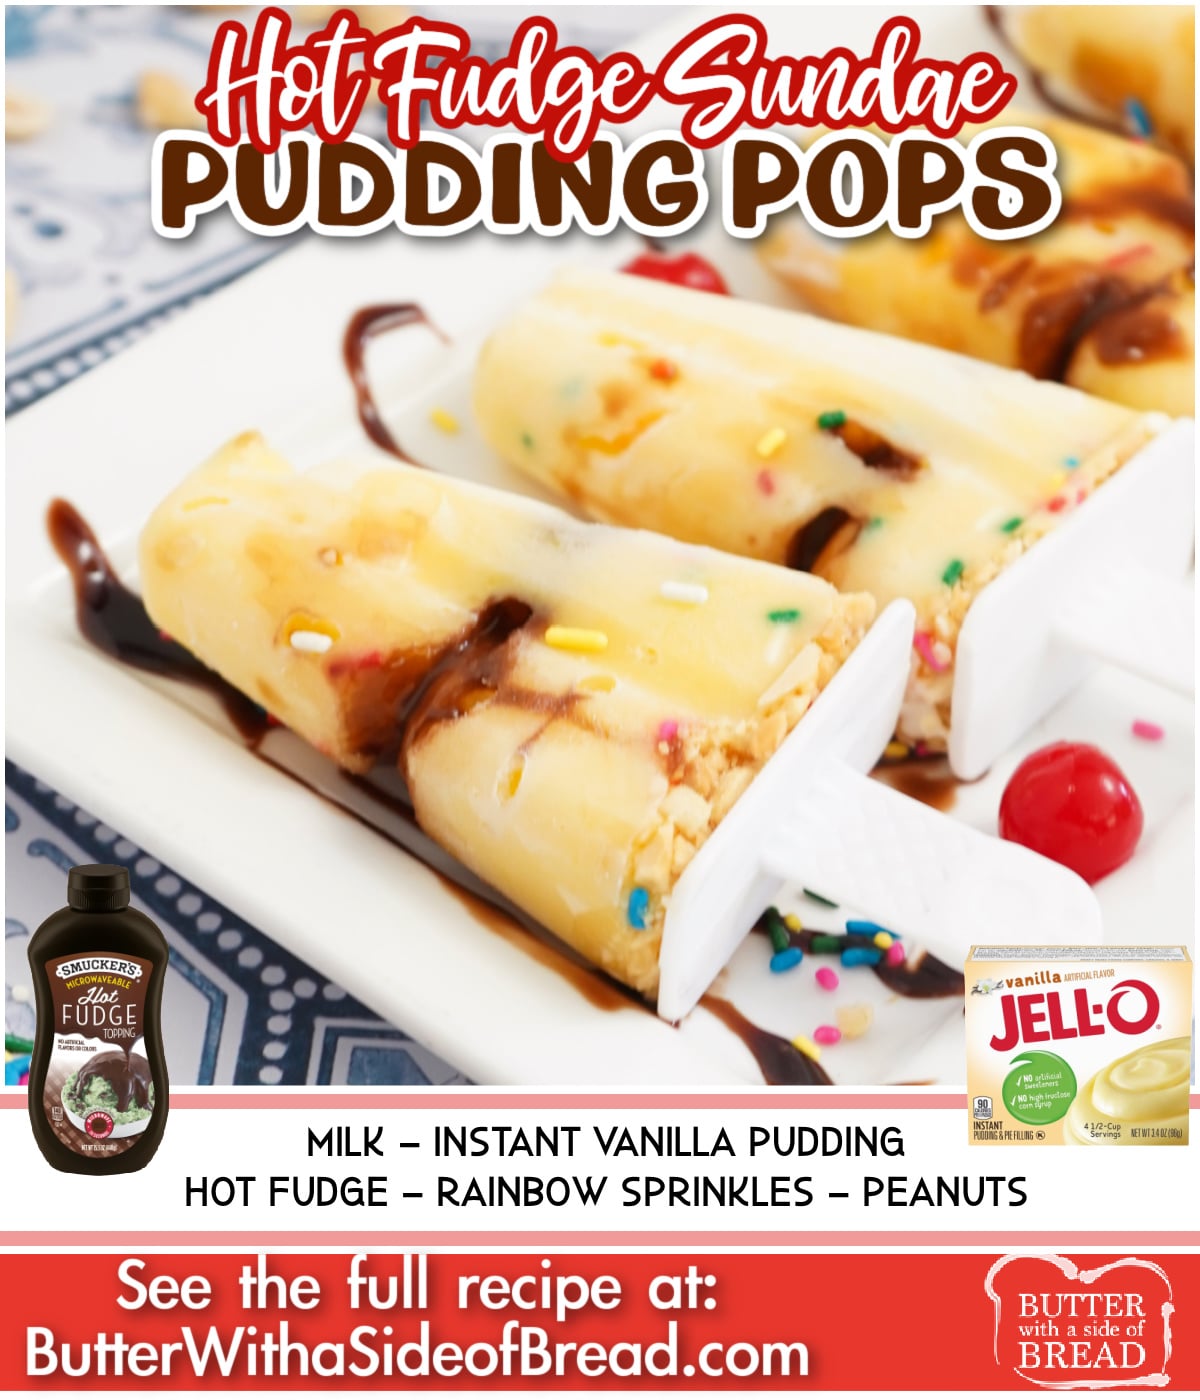 Hot Fudge Sundae Pudding Pops are made with vanilla pudding, hot fudge, sprinkles and peanuts. Layer the ingredients in a popsicle mold for a delicious frozen treat!